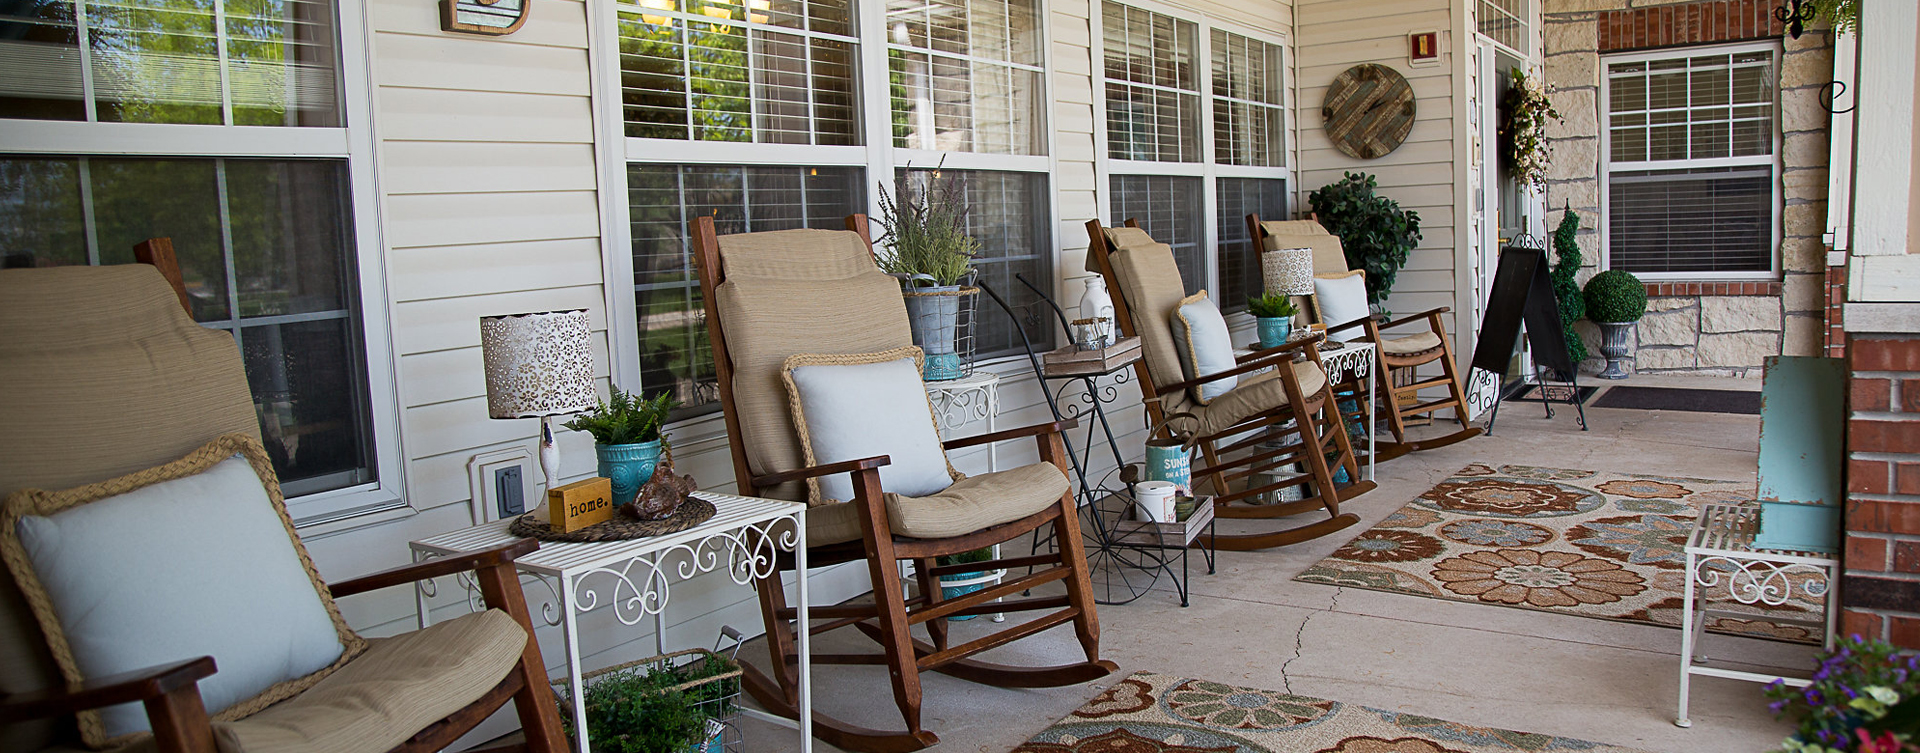 Relax in your favorite chair on the porch at Bickford of Burlington